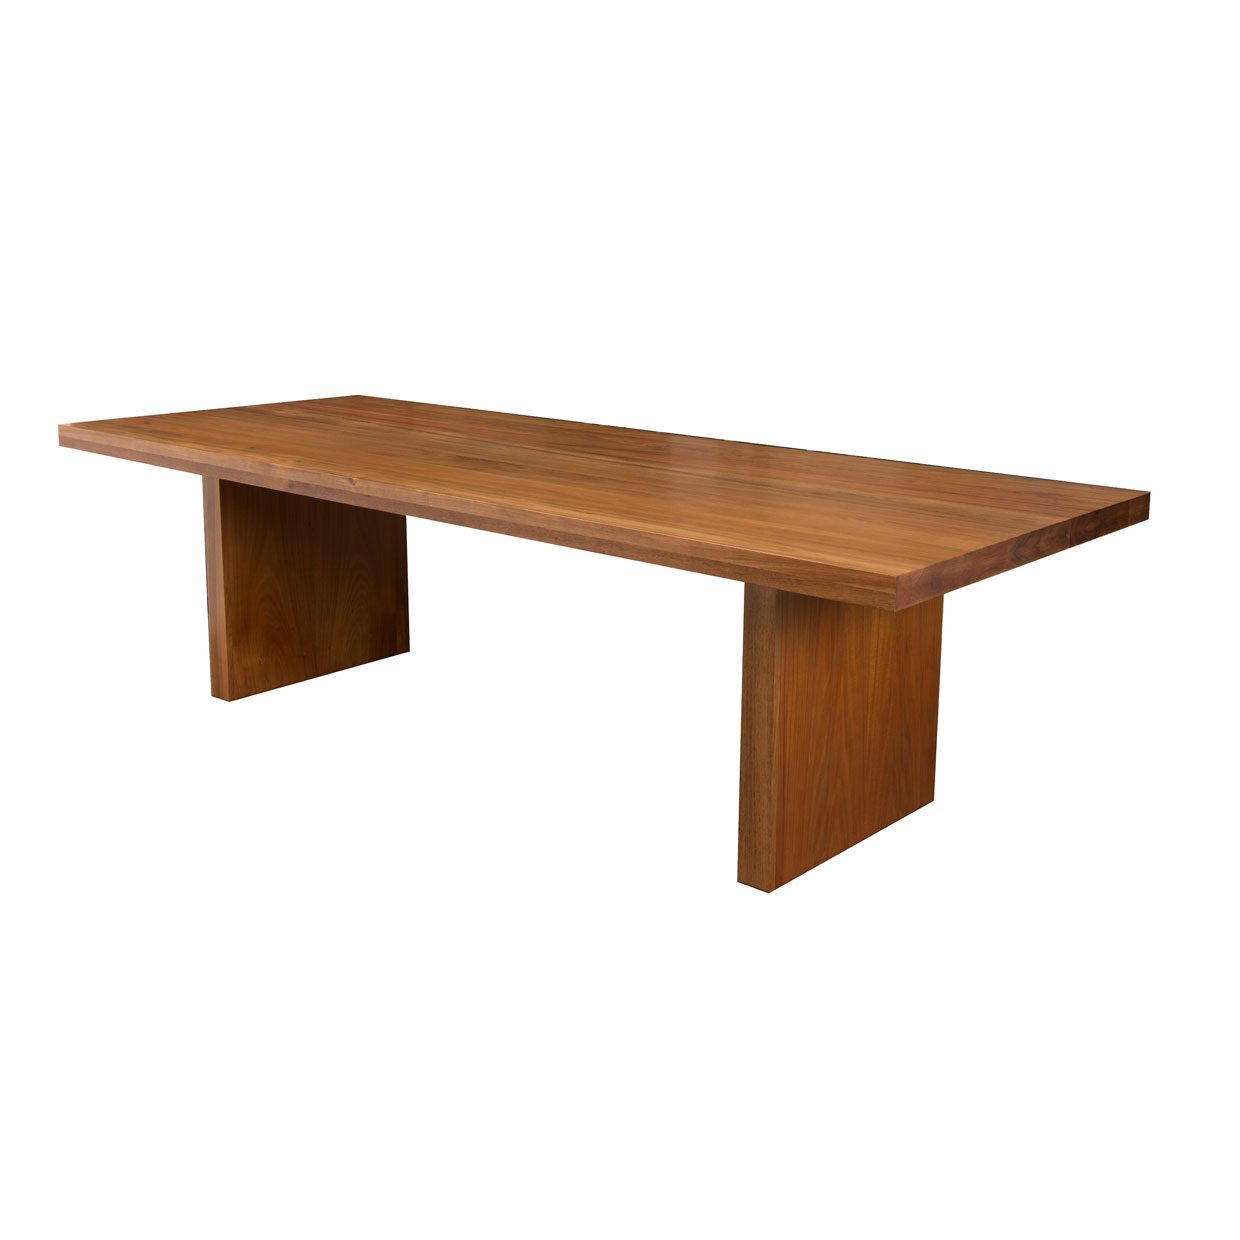 McLaren dining table solid timber blackwood